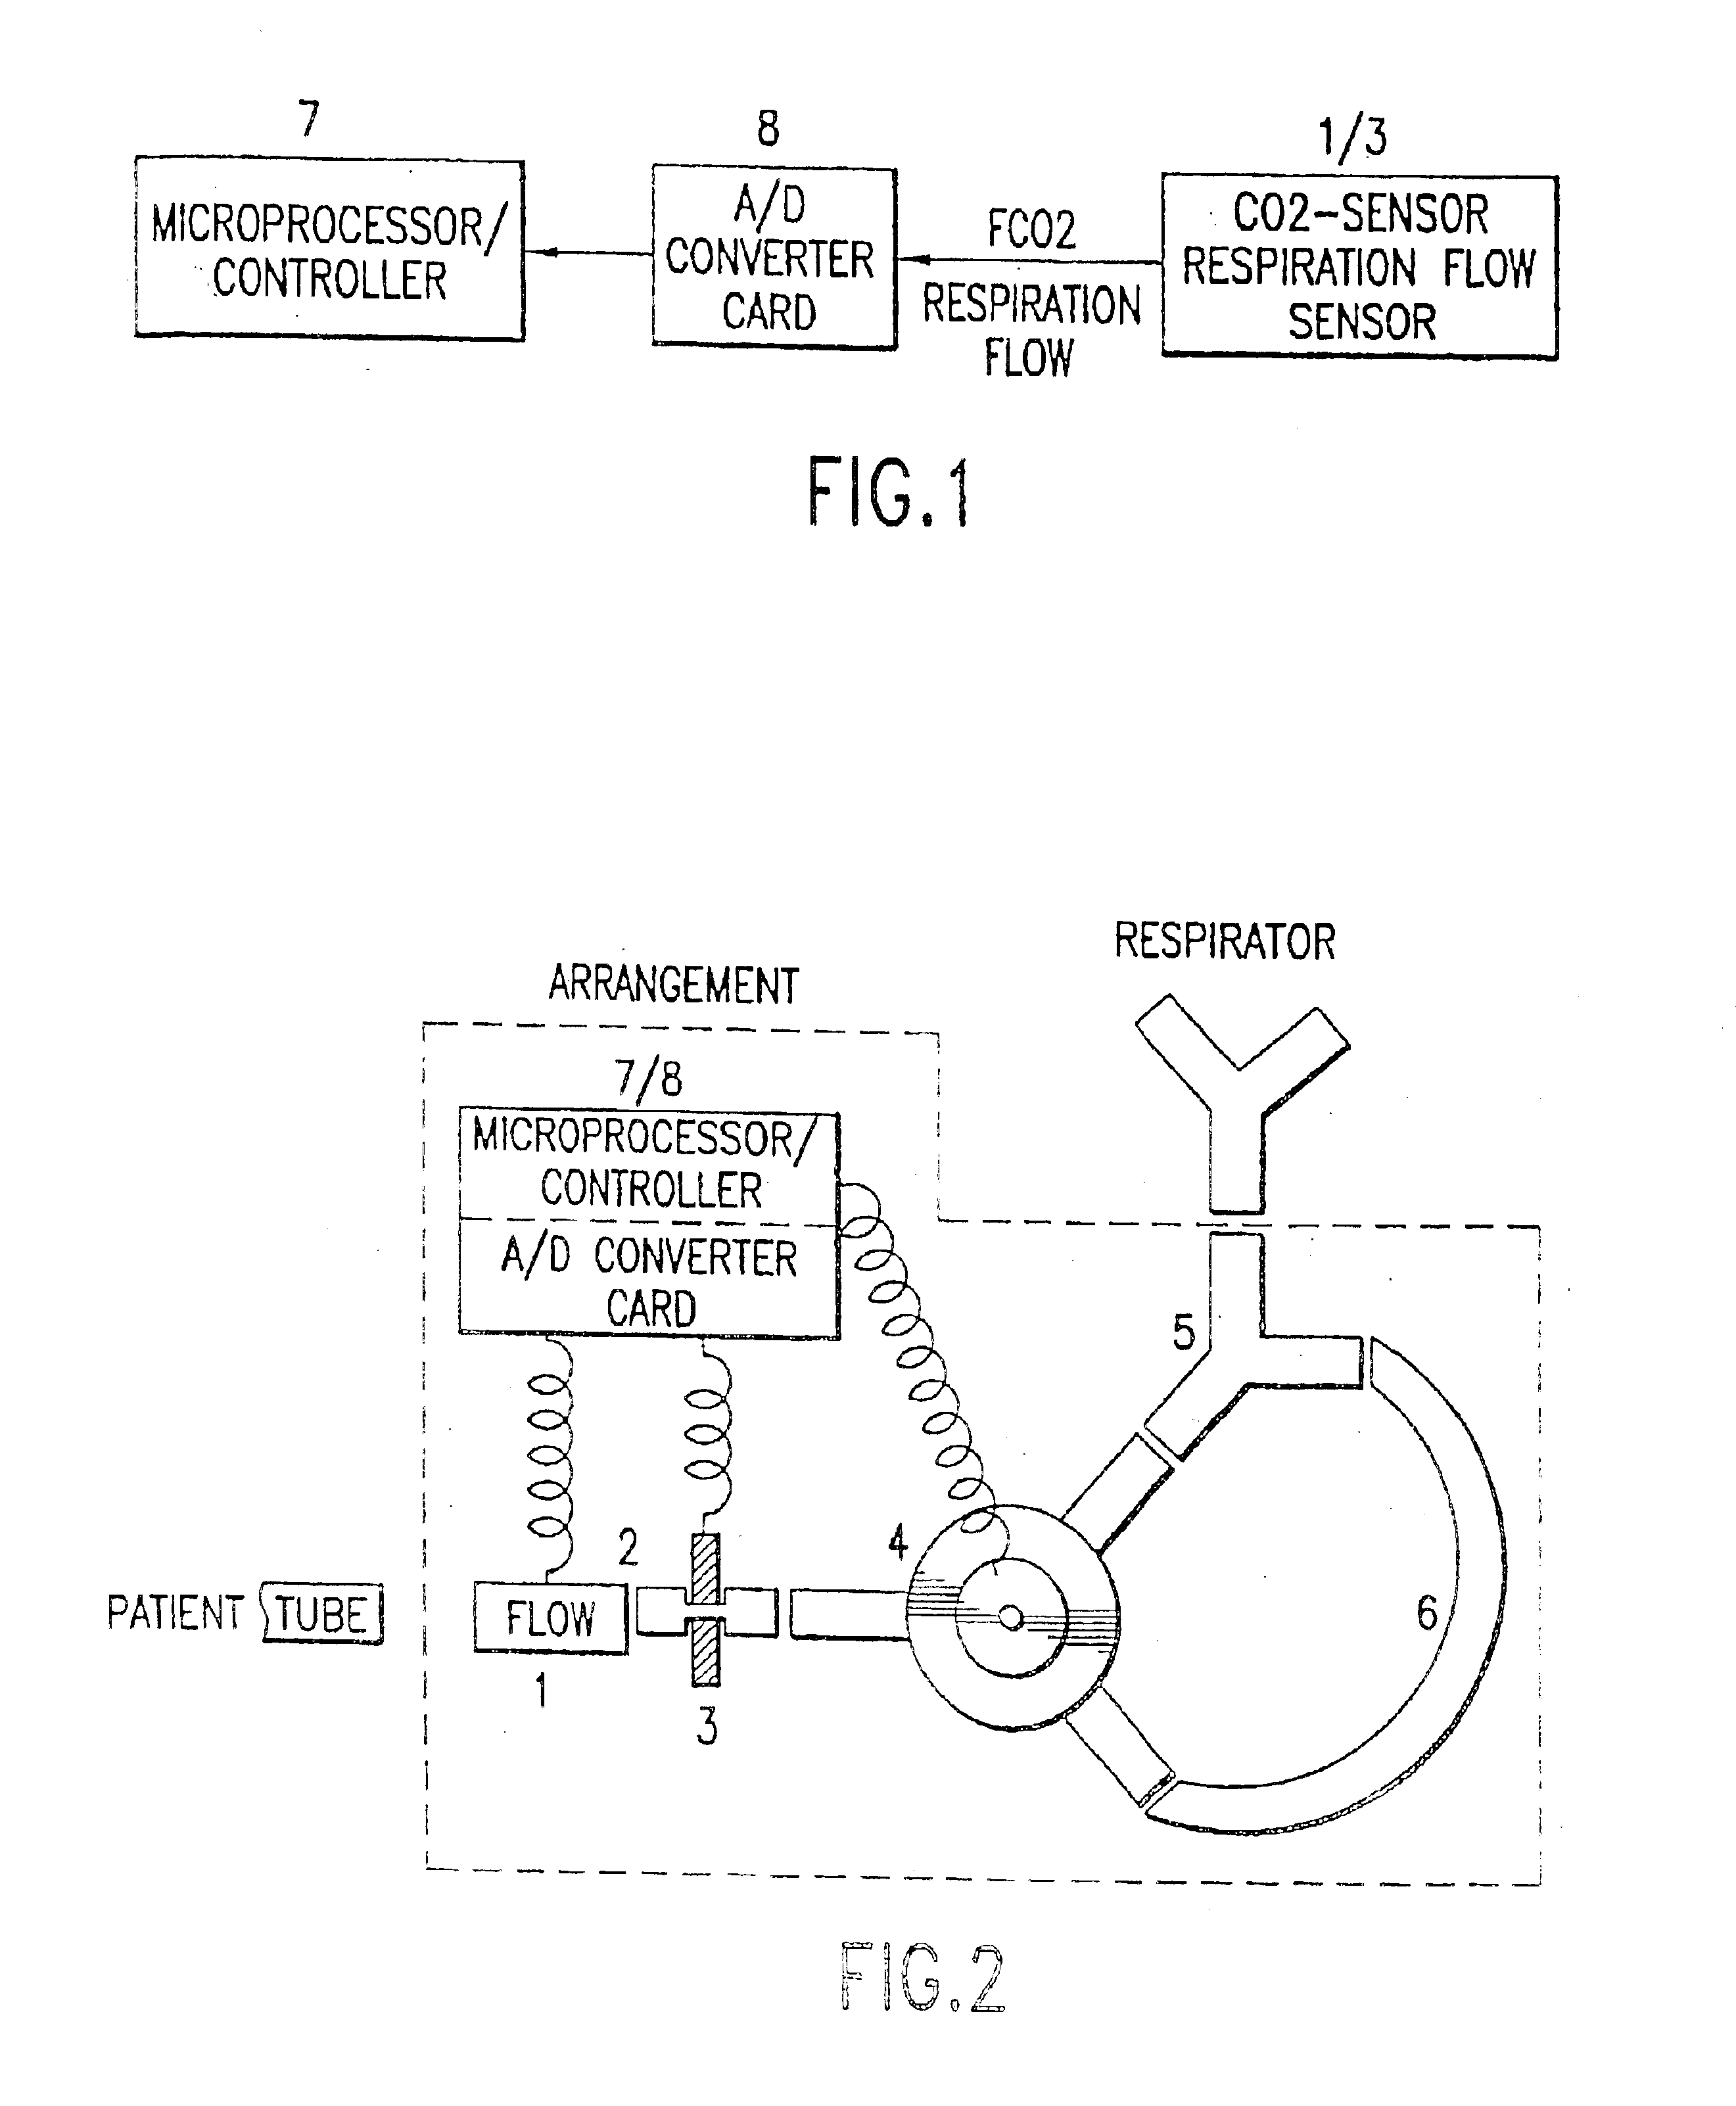 Arrangement for the determination of the effective pulmonary blood flow